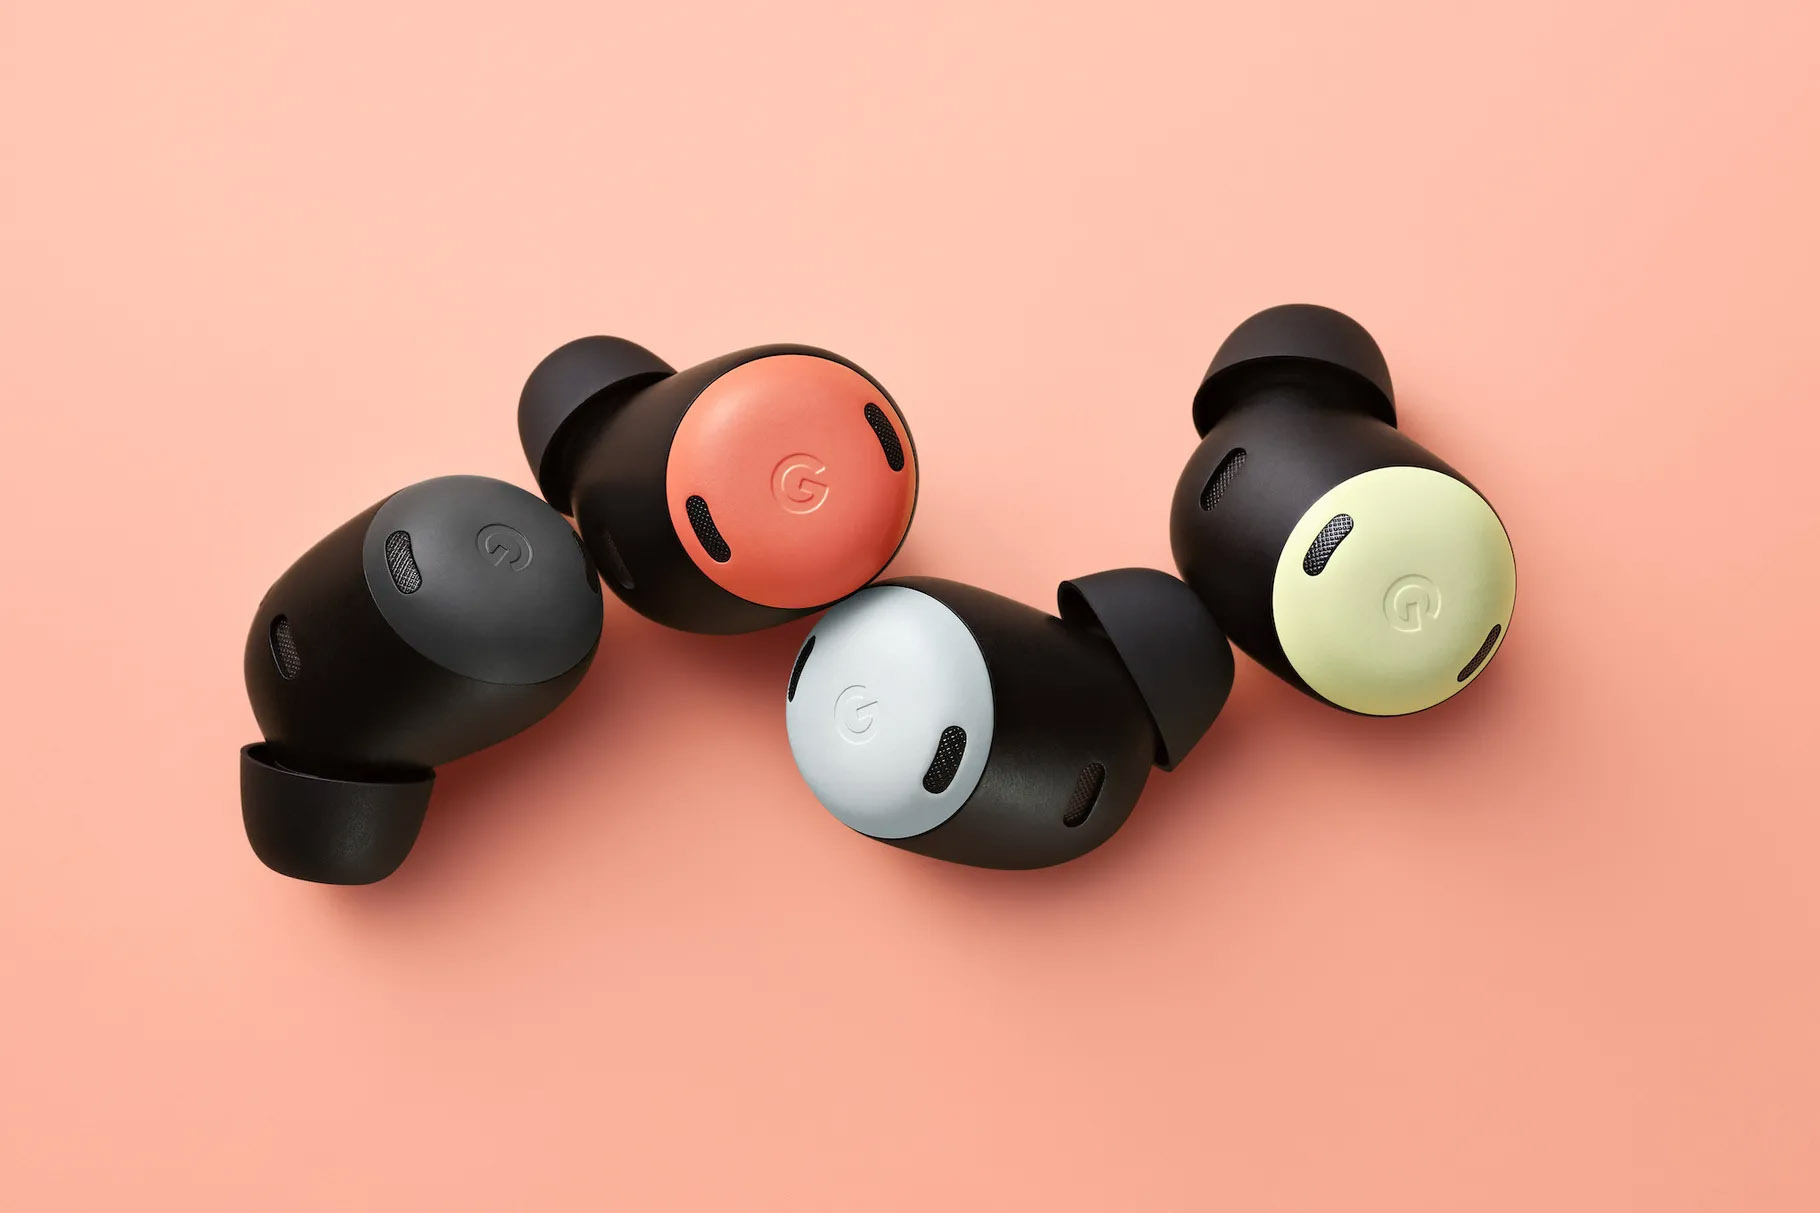 Four individual Pixel Buds Pro headphones sit on a pink background.